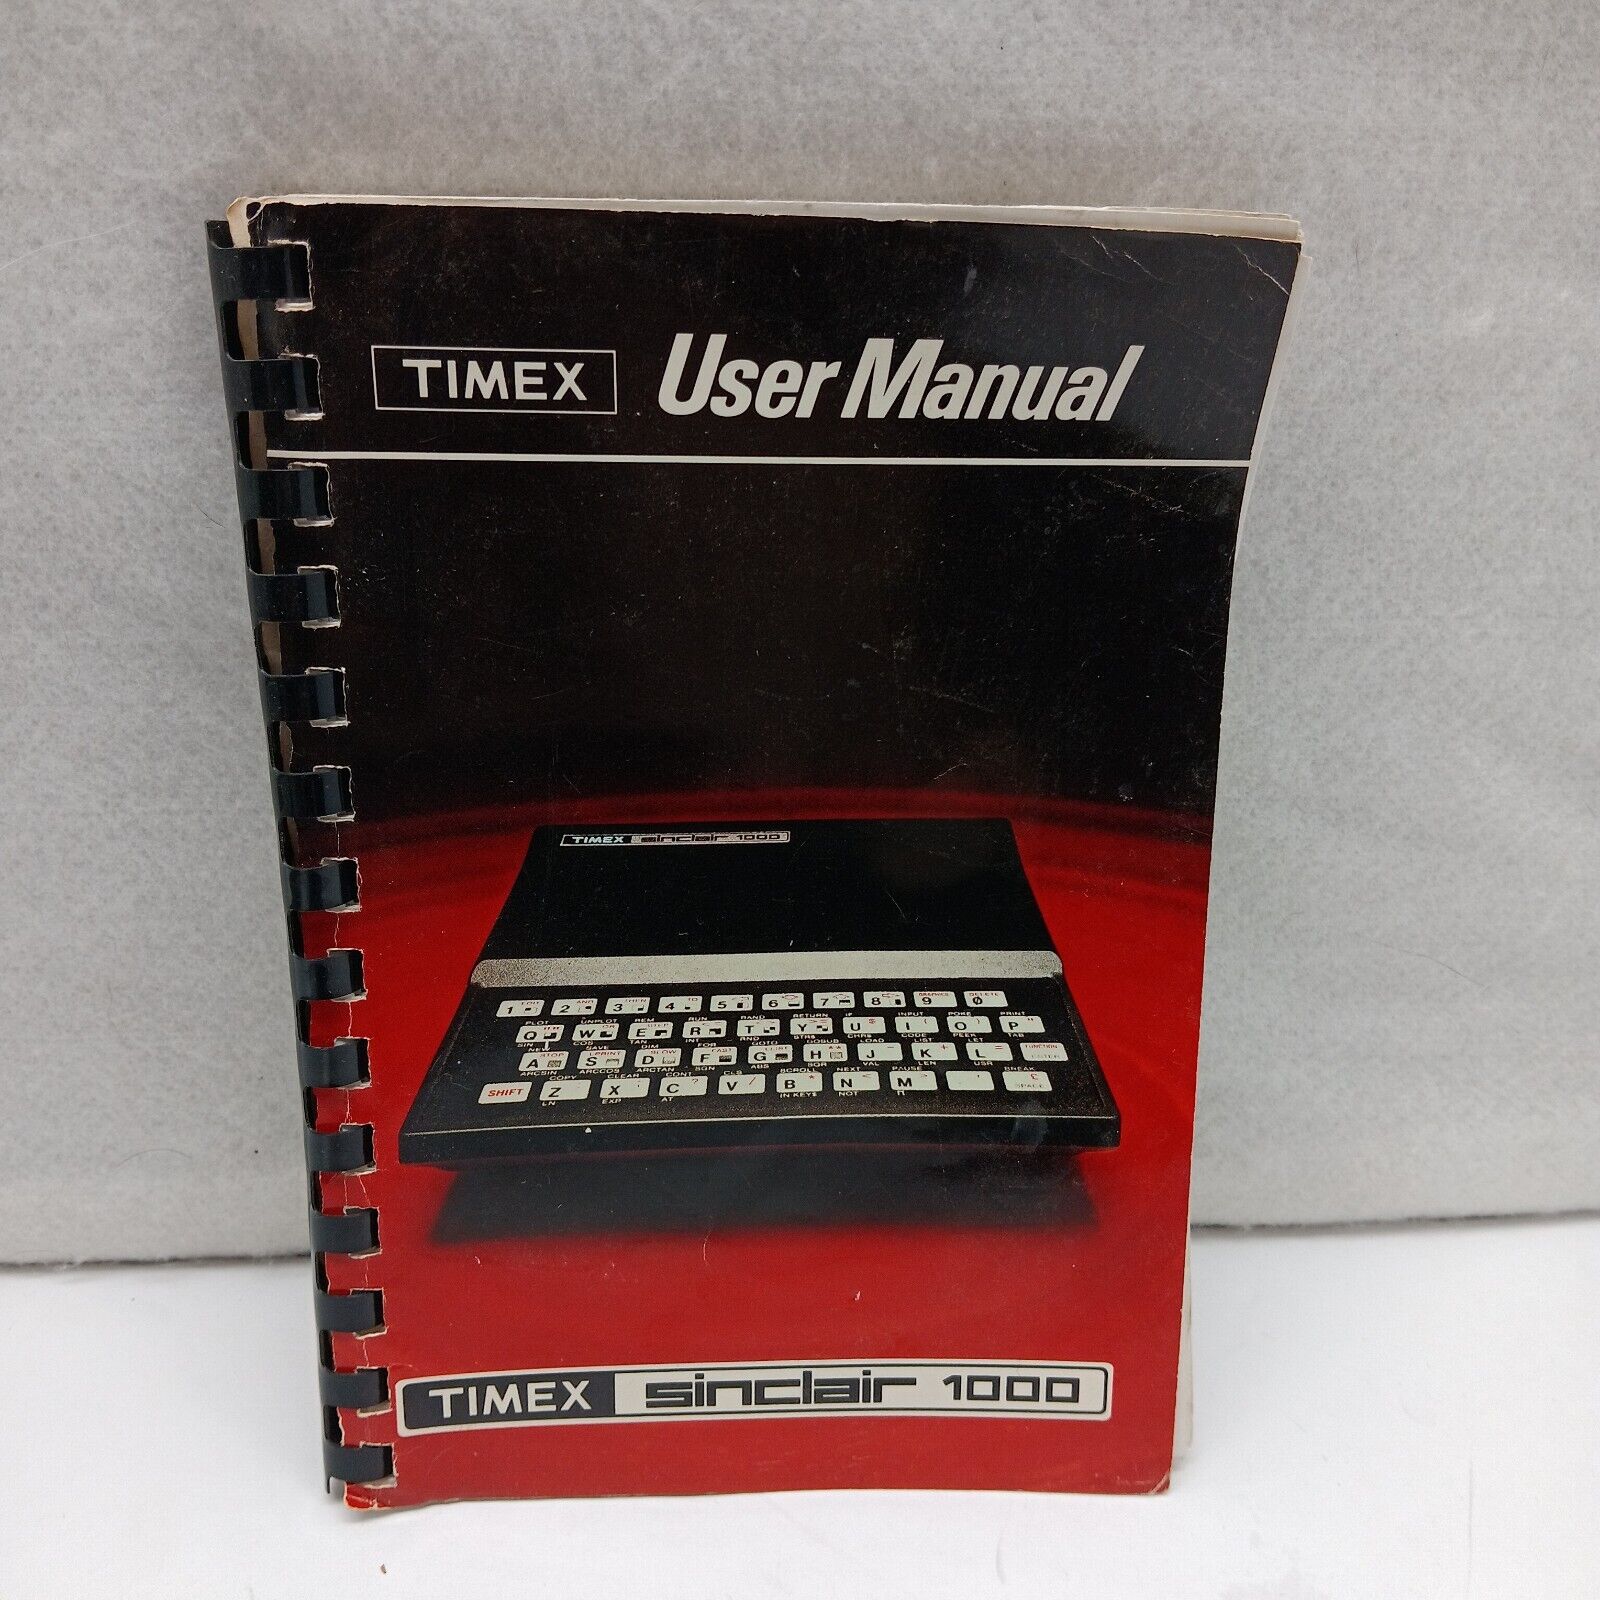 Original User Manual Instruction Book for the Timex Sinclair 1000 Computer 1982